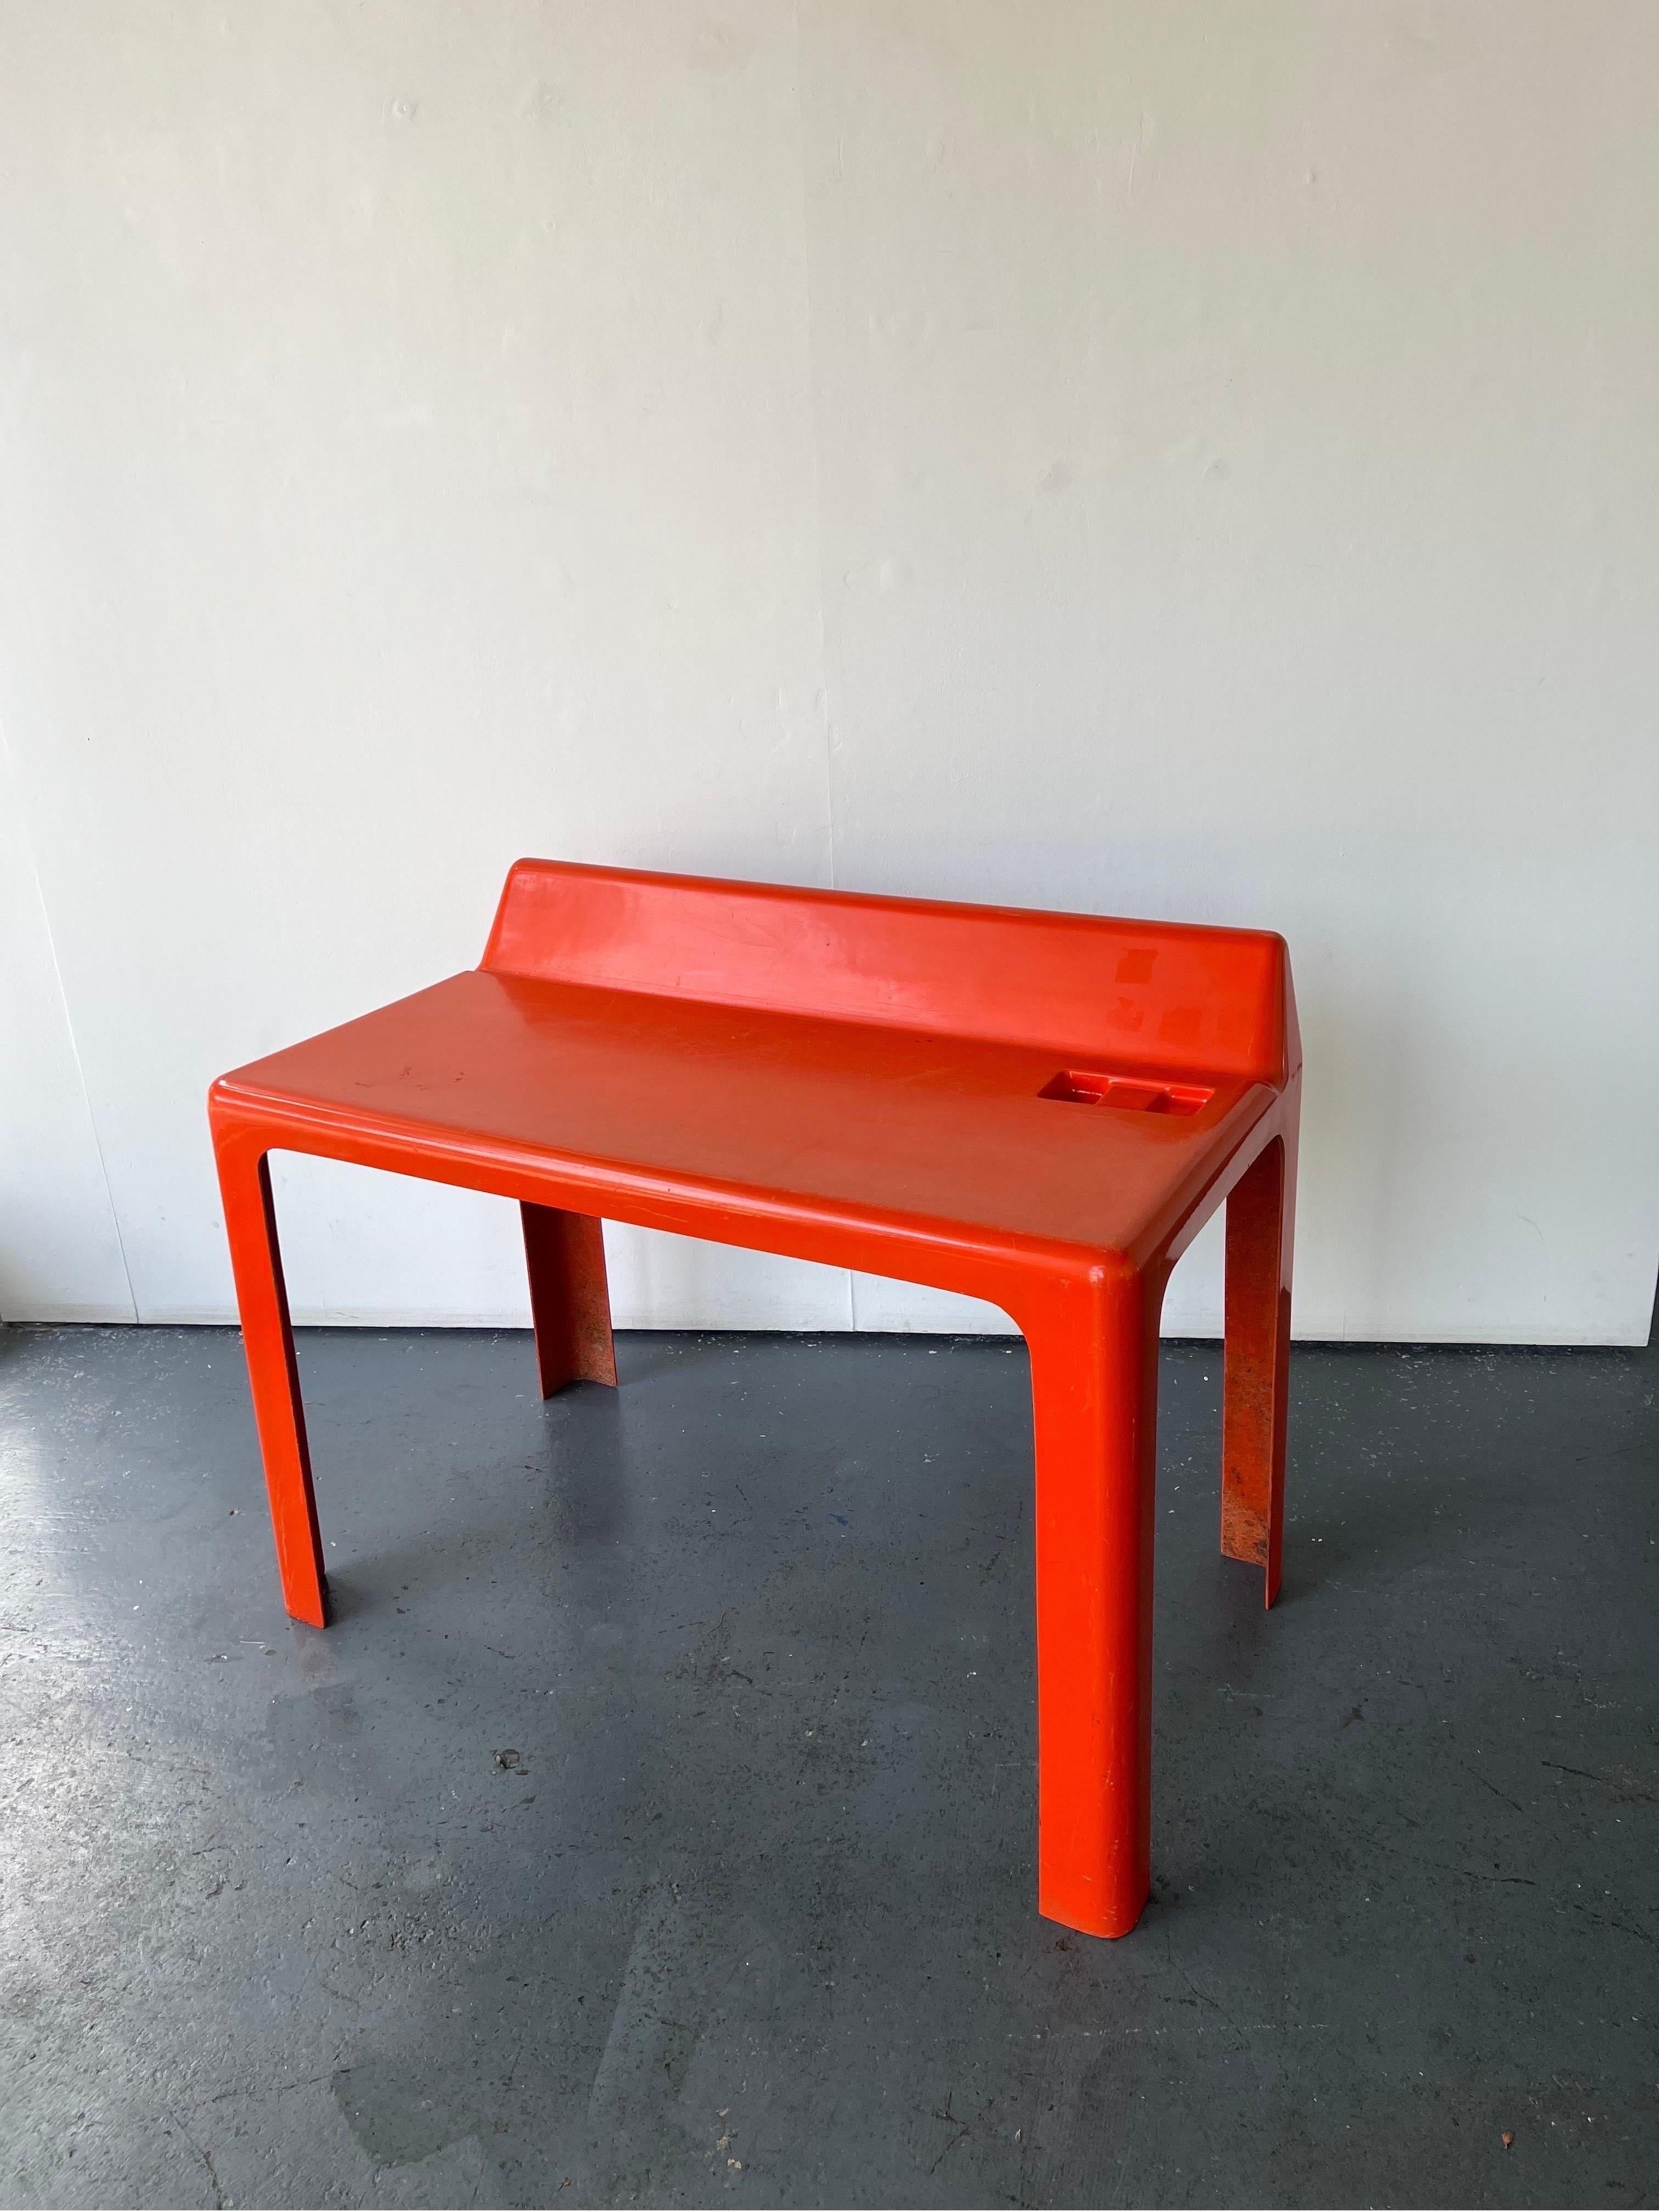 “Ginger” desk by French designer Patrick Gingembre in the most fantastic orange fibreglass.

Measures: L: 110cm x H: 82cm x D: 76cm

An iconic space age design from the 70s.

There is some general wear consistent with age, scratches and marks,